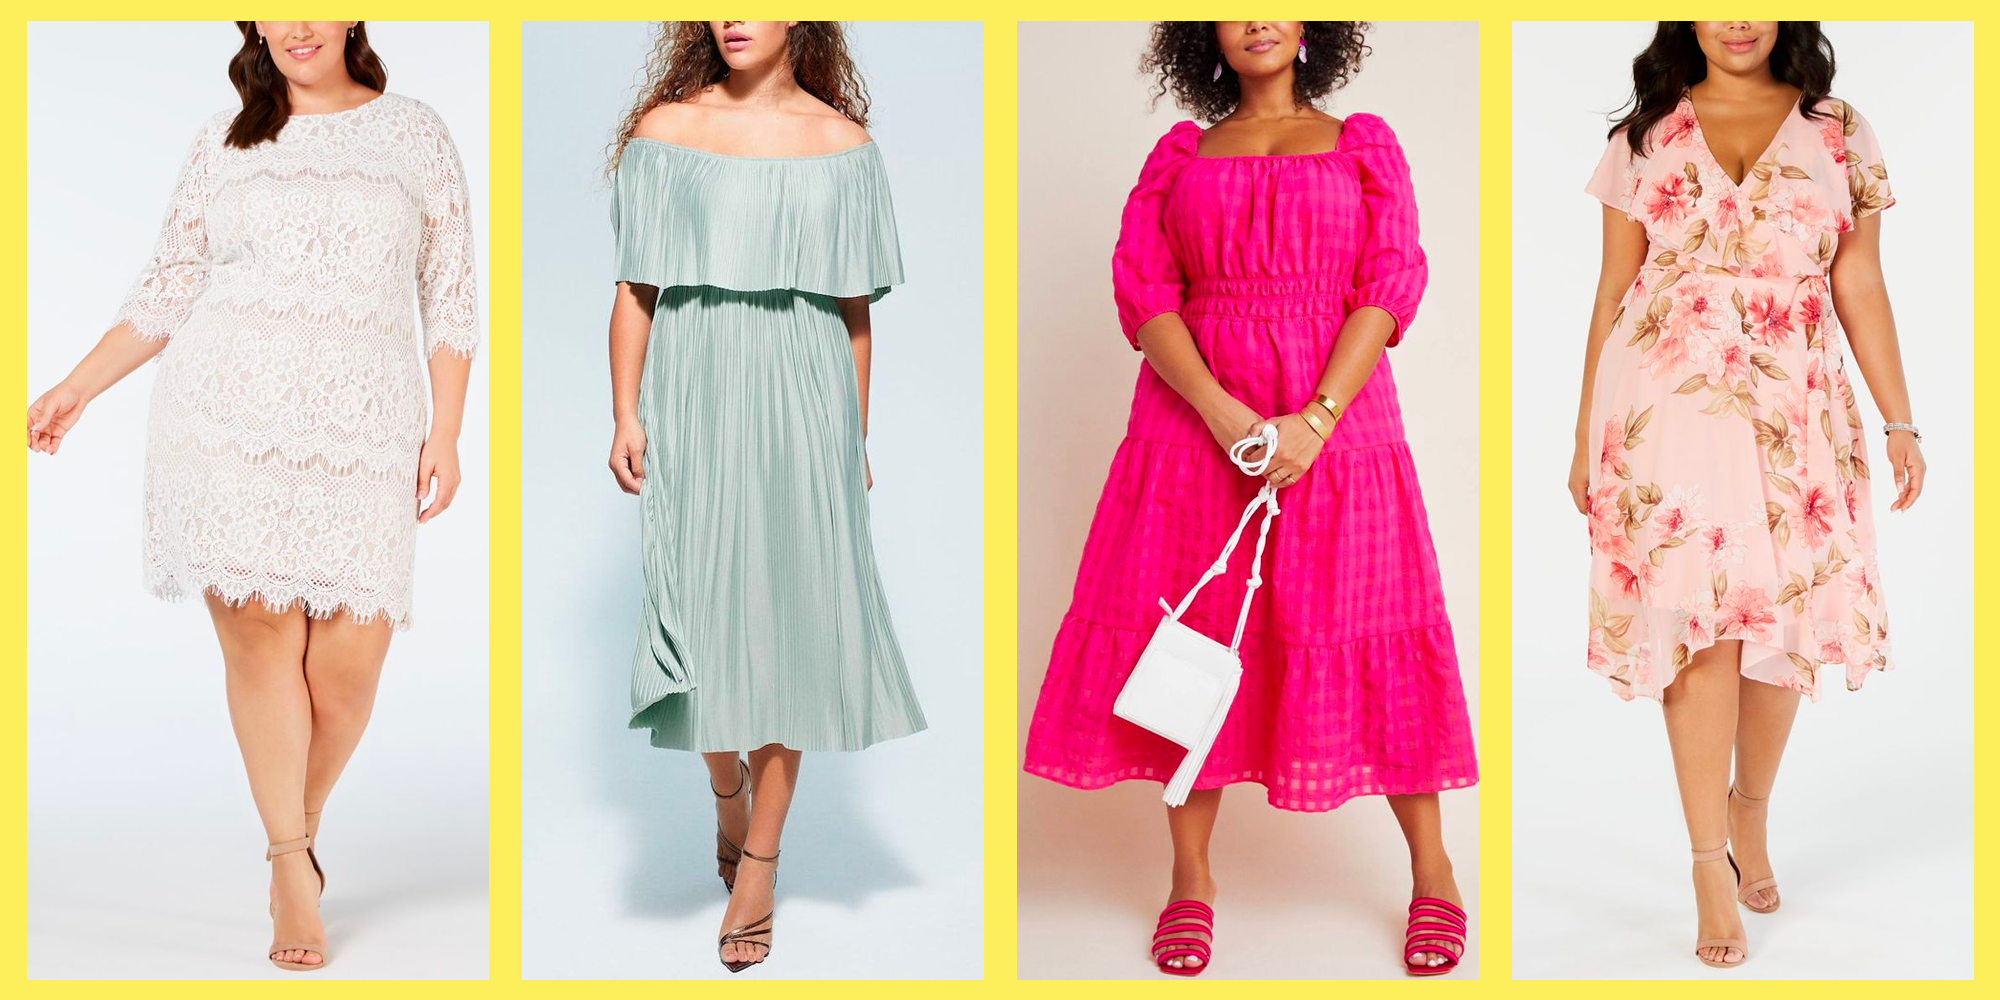 pink dresses for plus size women